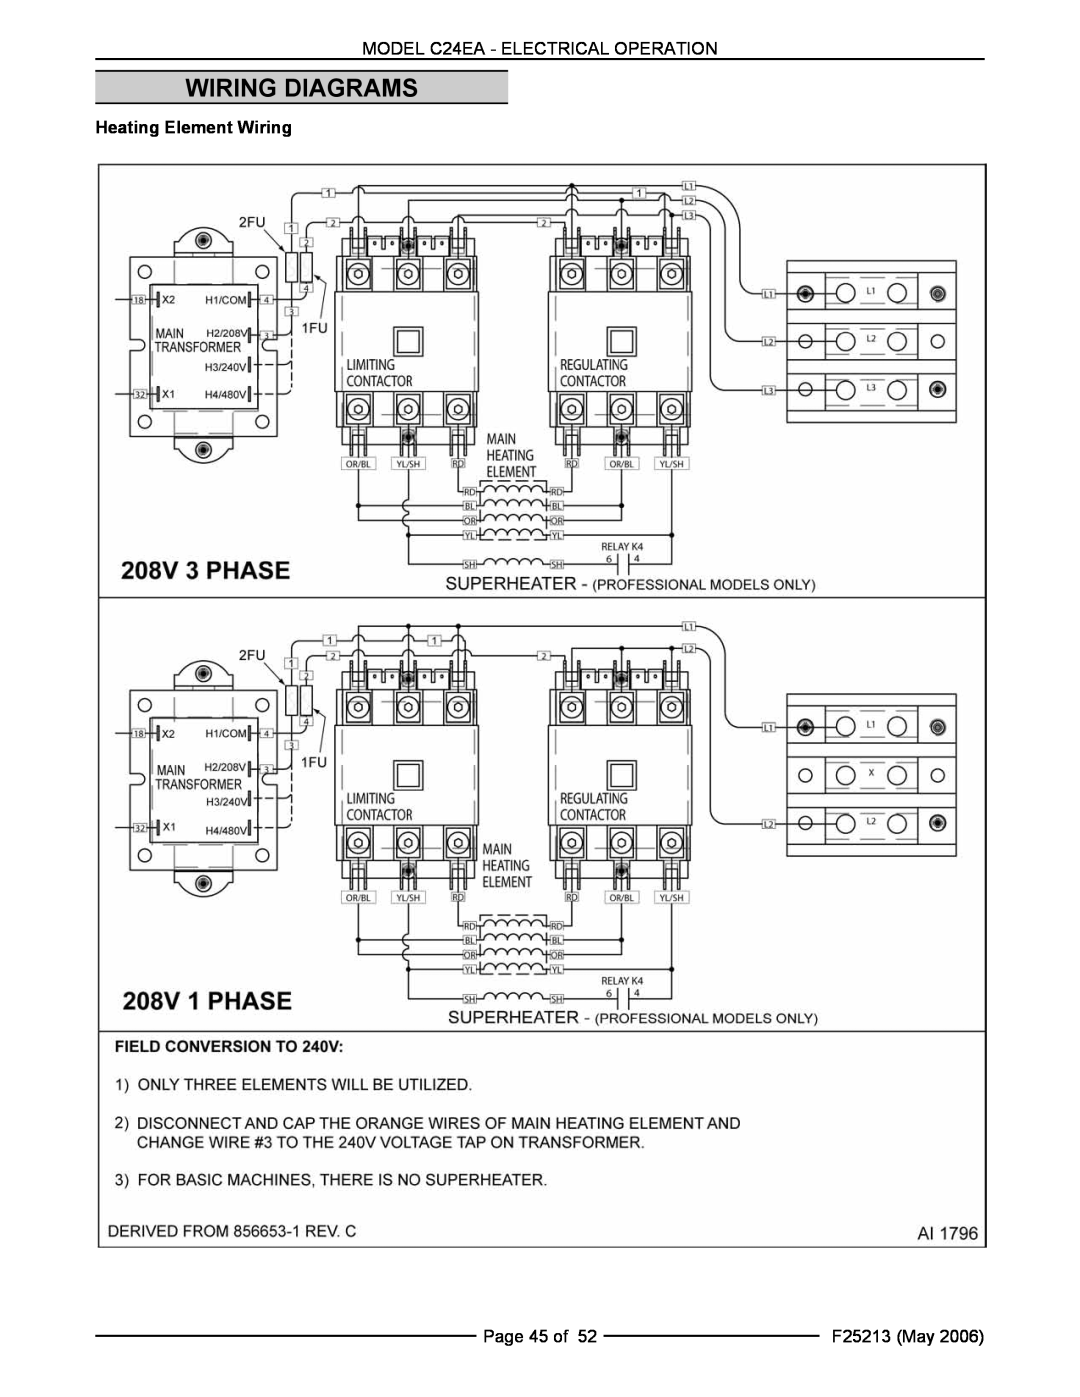 Vulcan-Hart C24EA5 208/240V PRO, C24EA5 480V BASIC, C24EA5 480V PRO, C24EA3 480V PRO Wiring Diagrams, Heating Element Wiring 